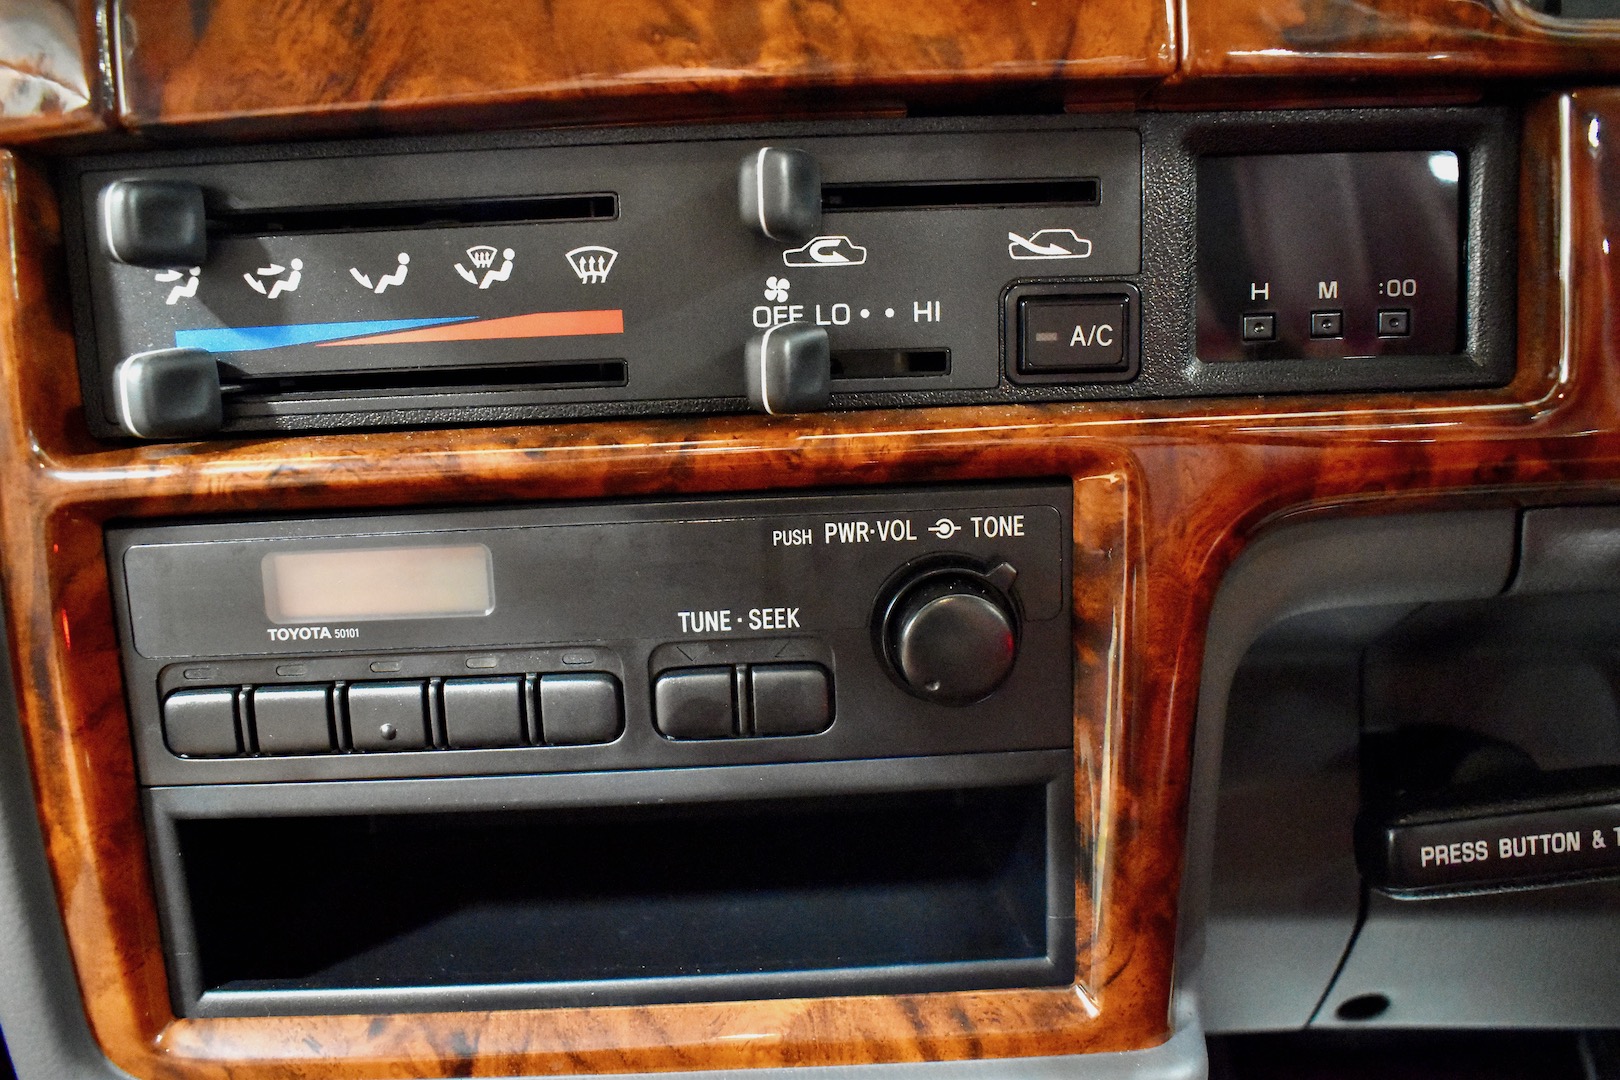 1996 Toyota Classic climate control